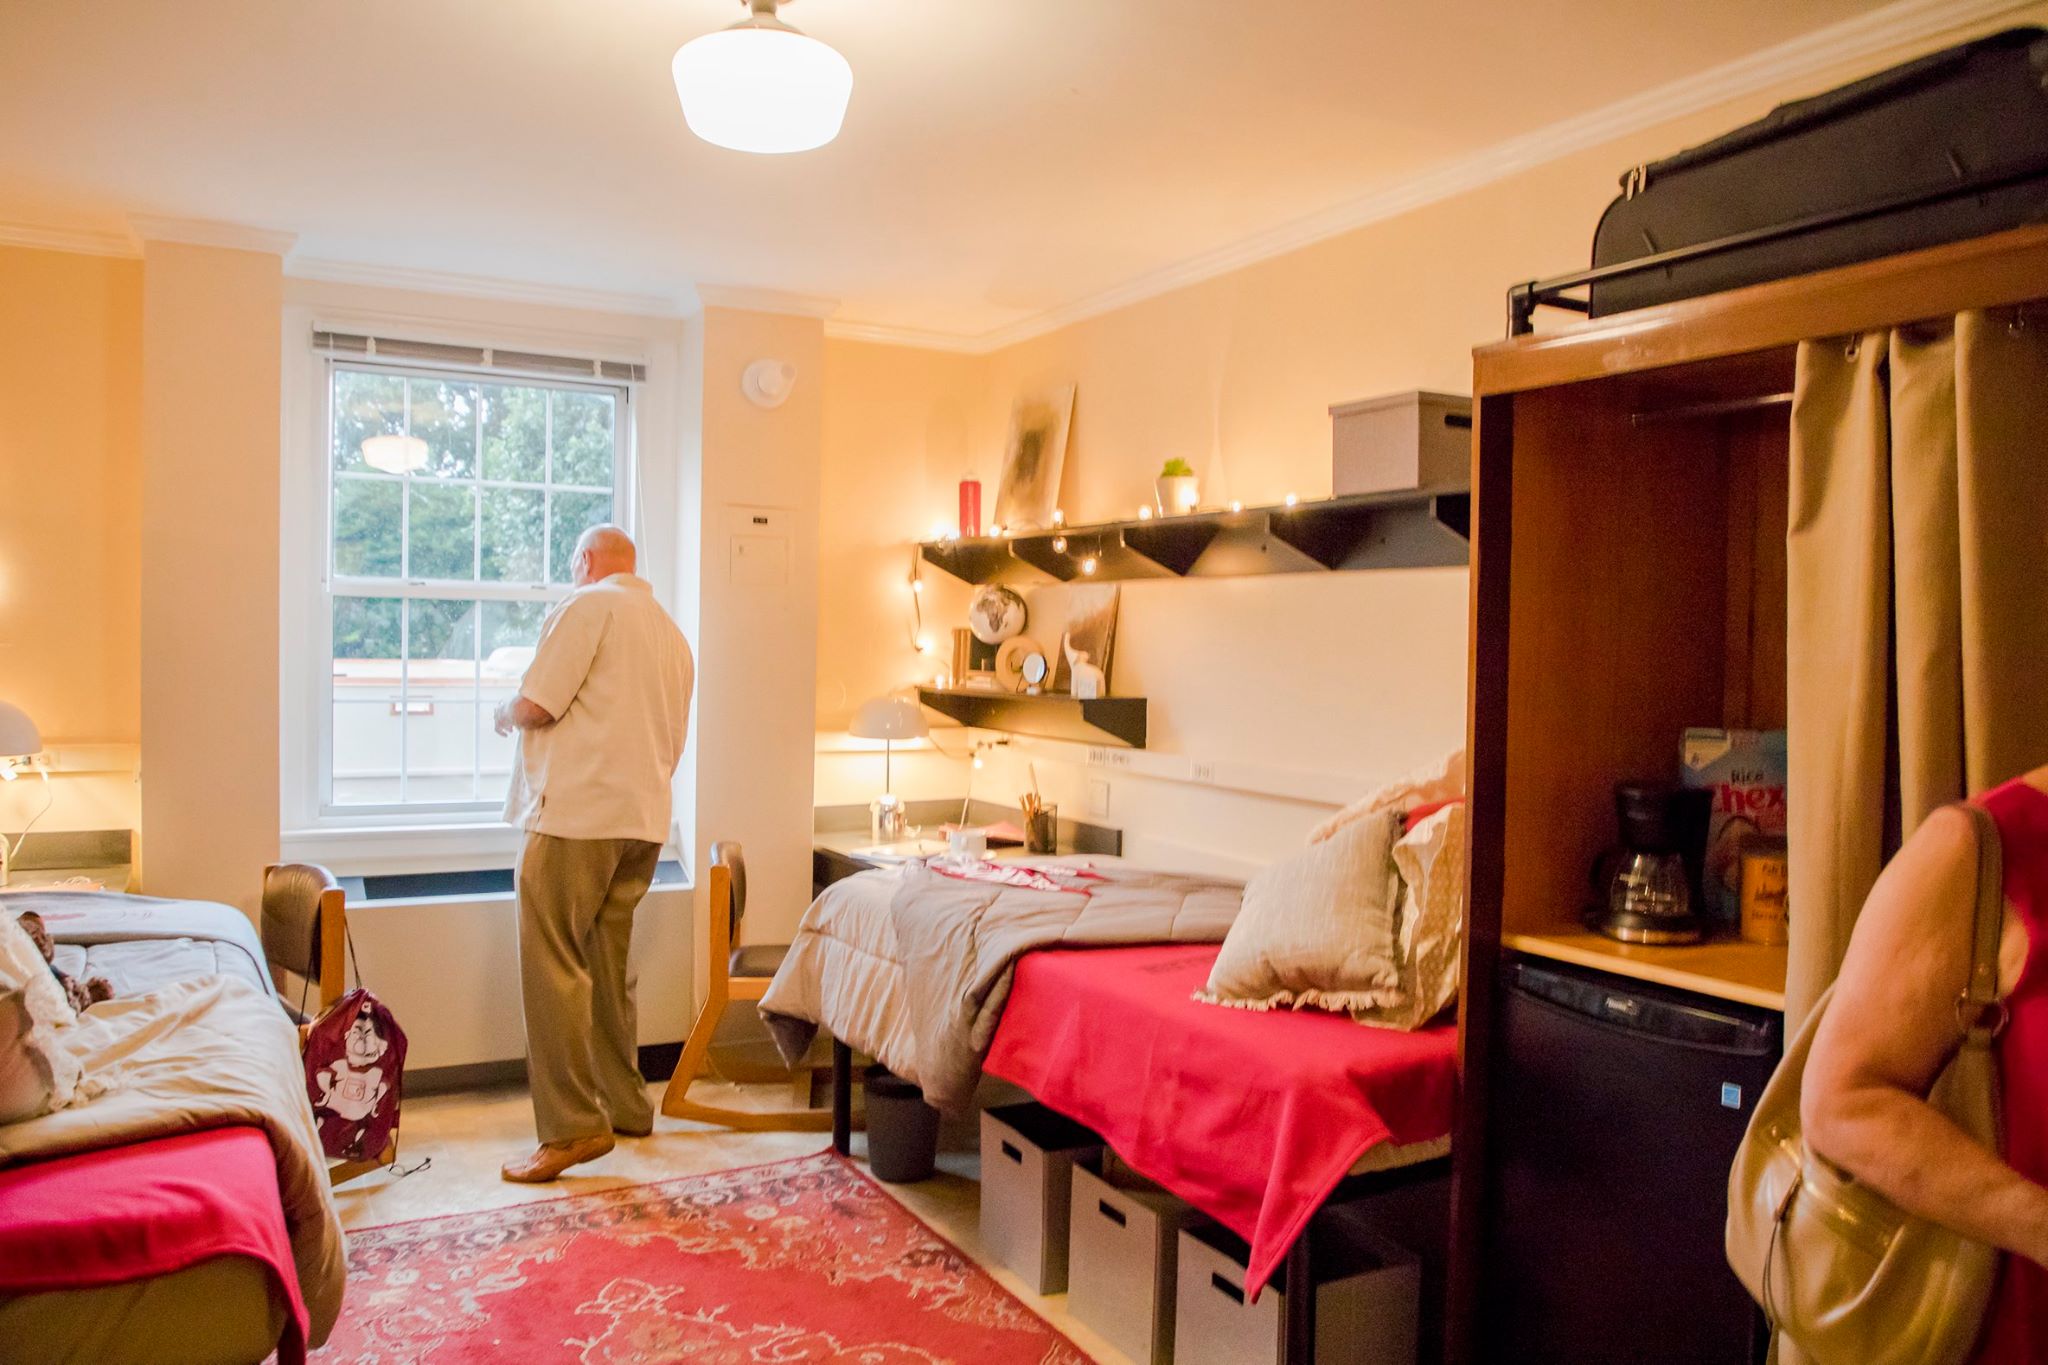 Binford rooms feature comfortable beds and loads of storage space.